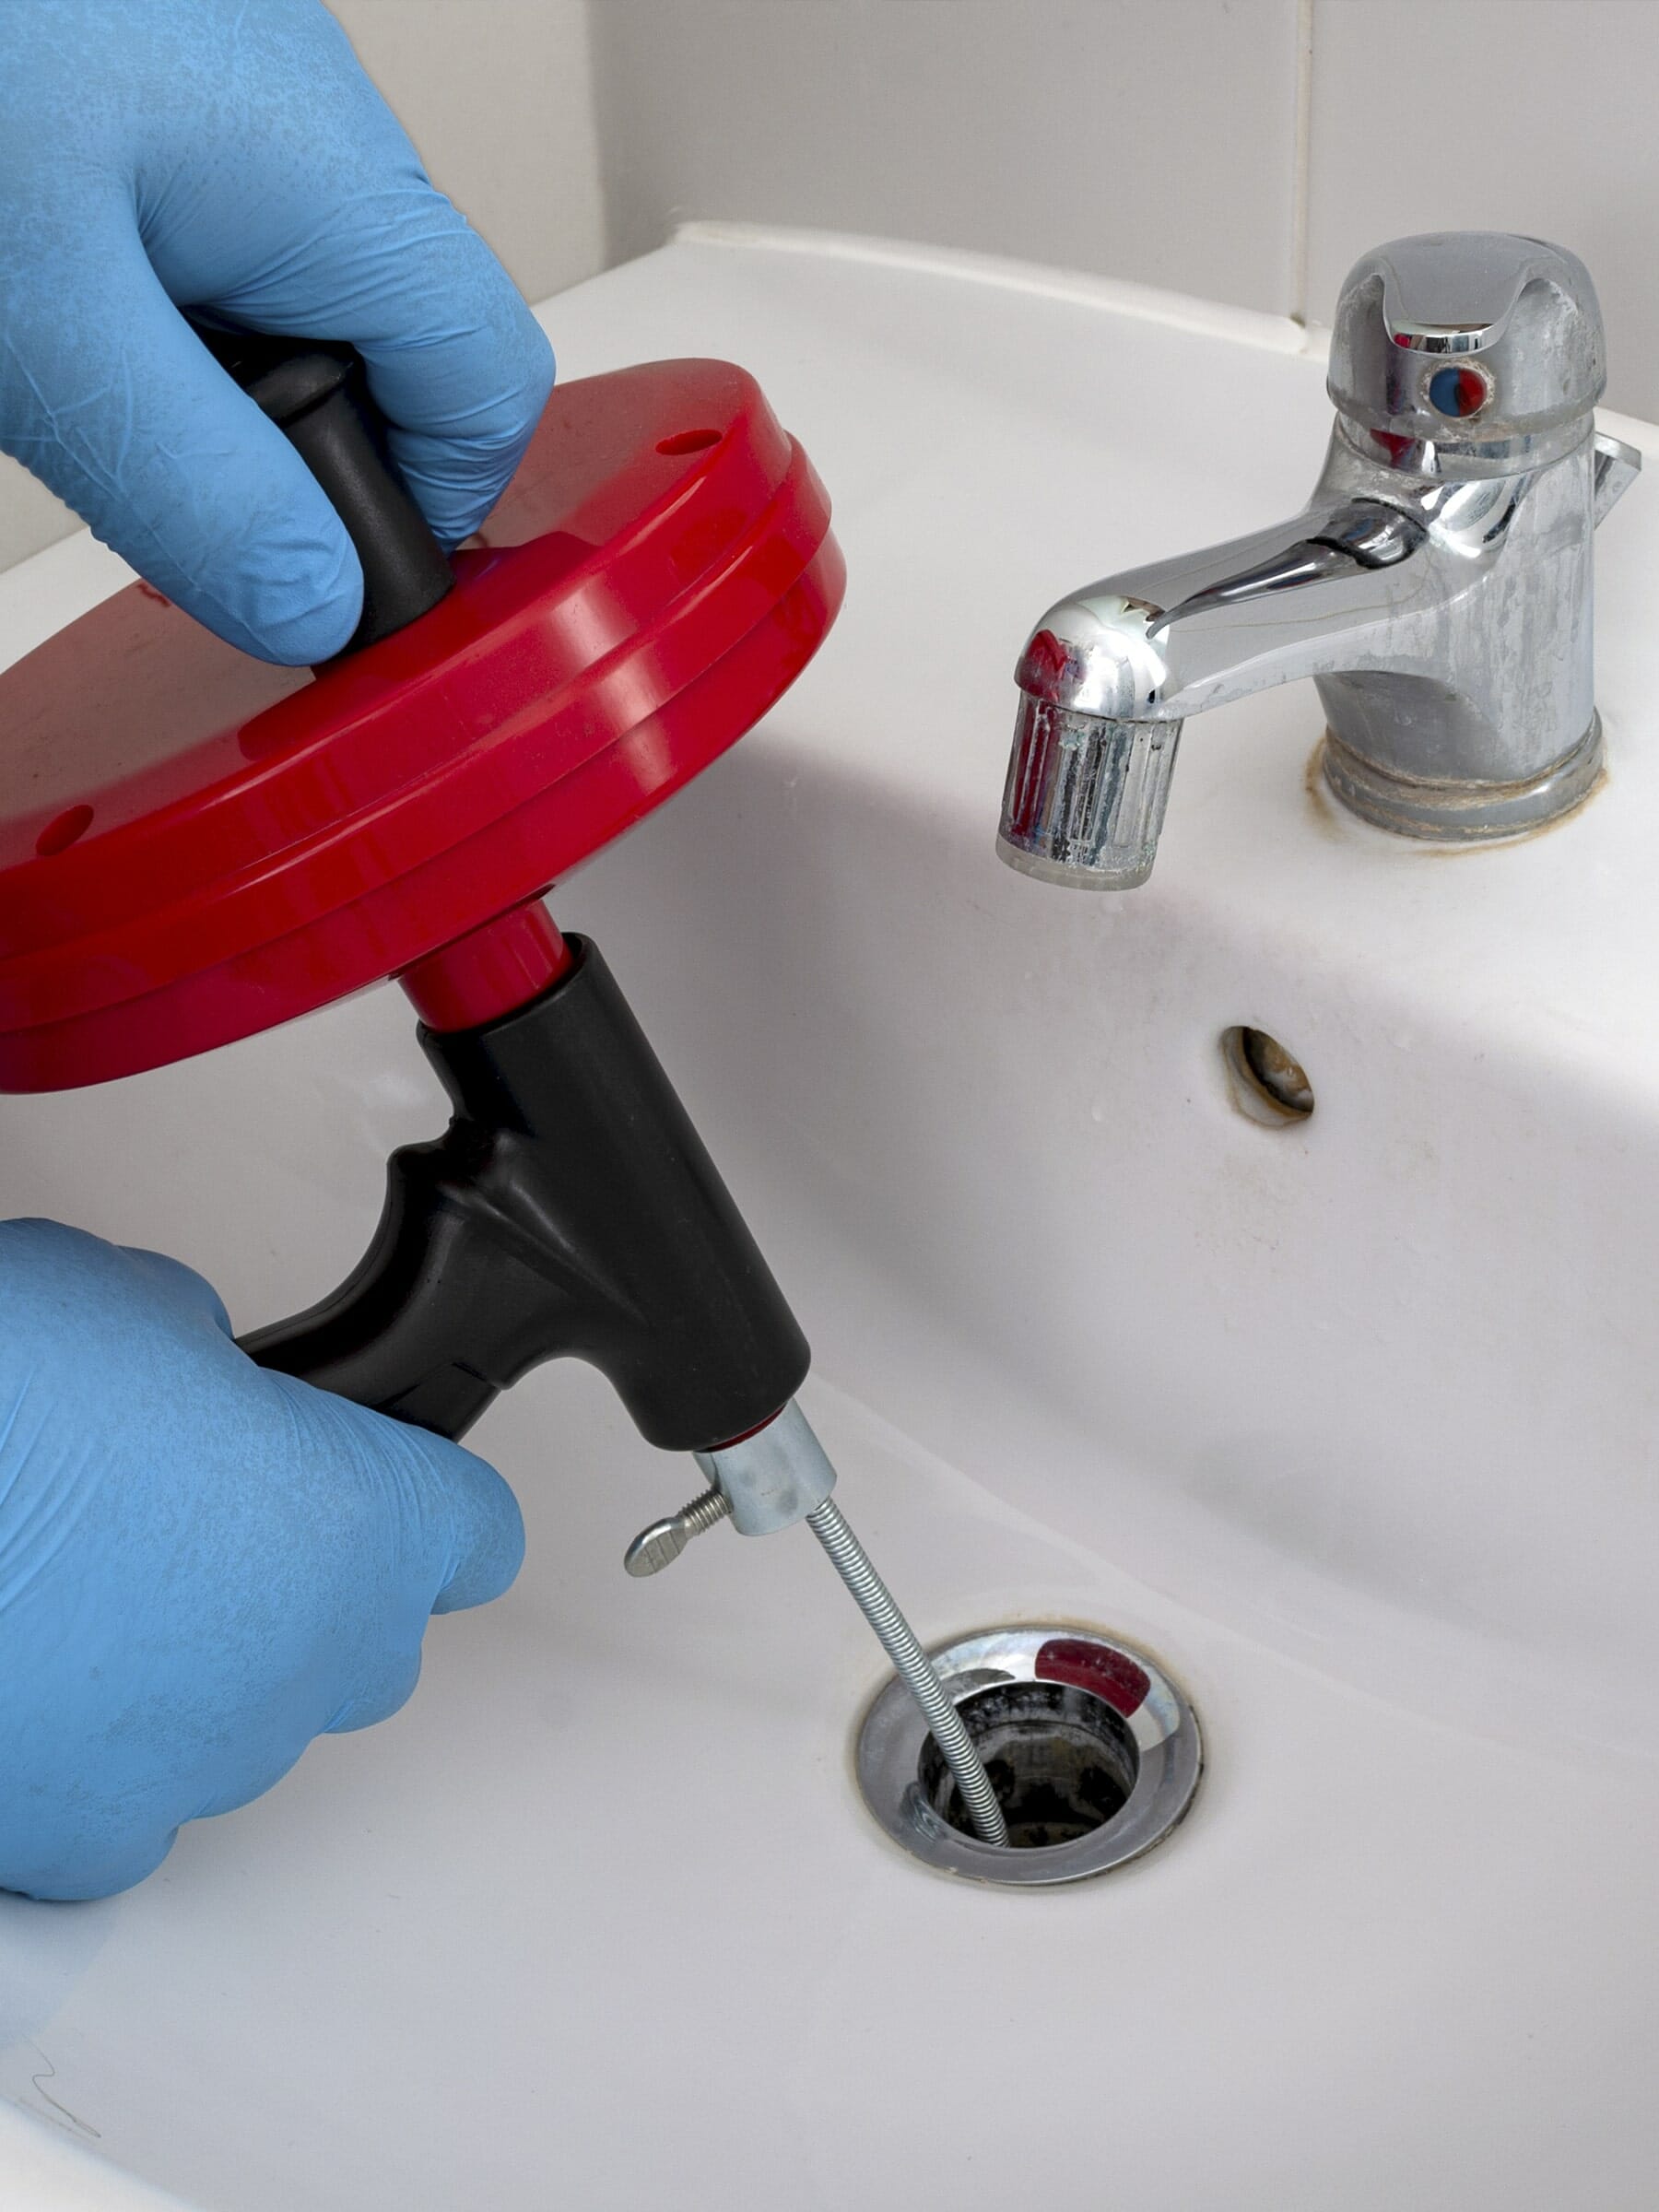 Hands with latex gloves use tools to clean drains